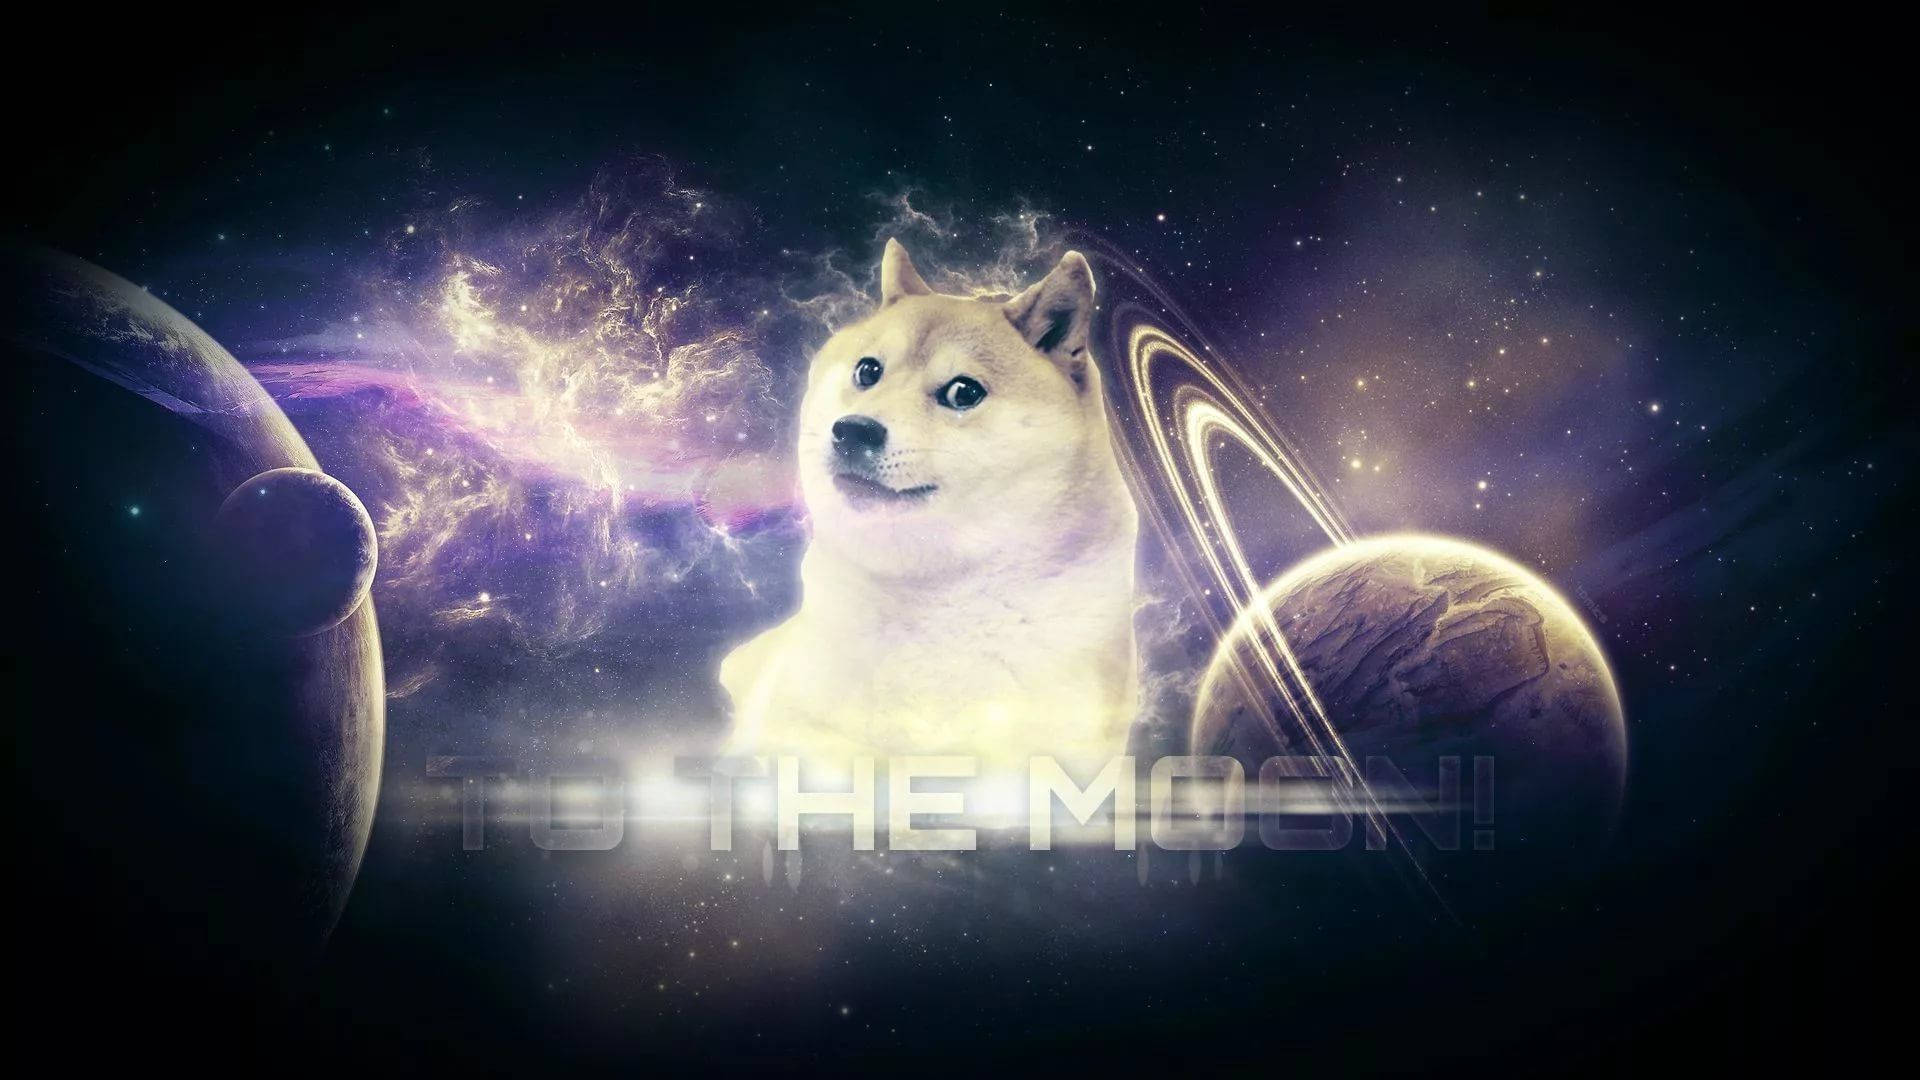 Doge Meme on space that says 